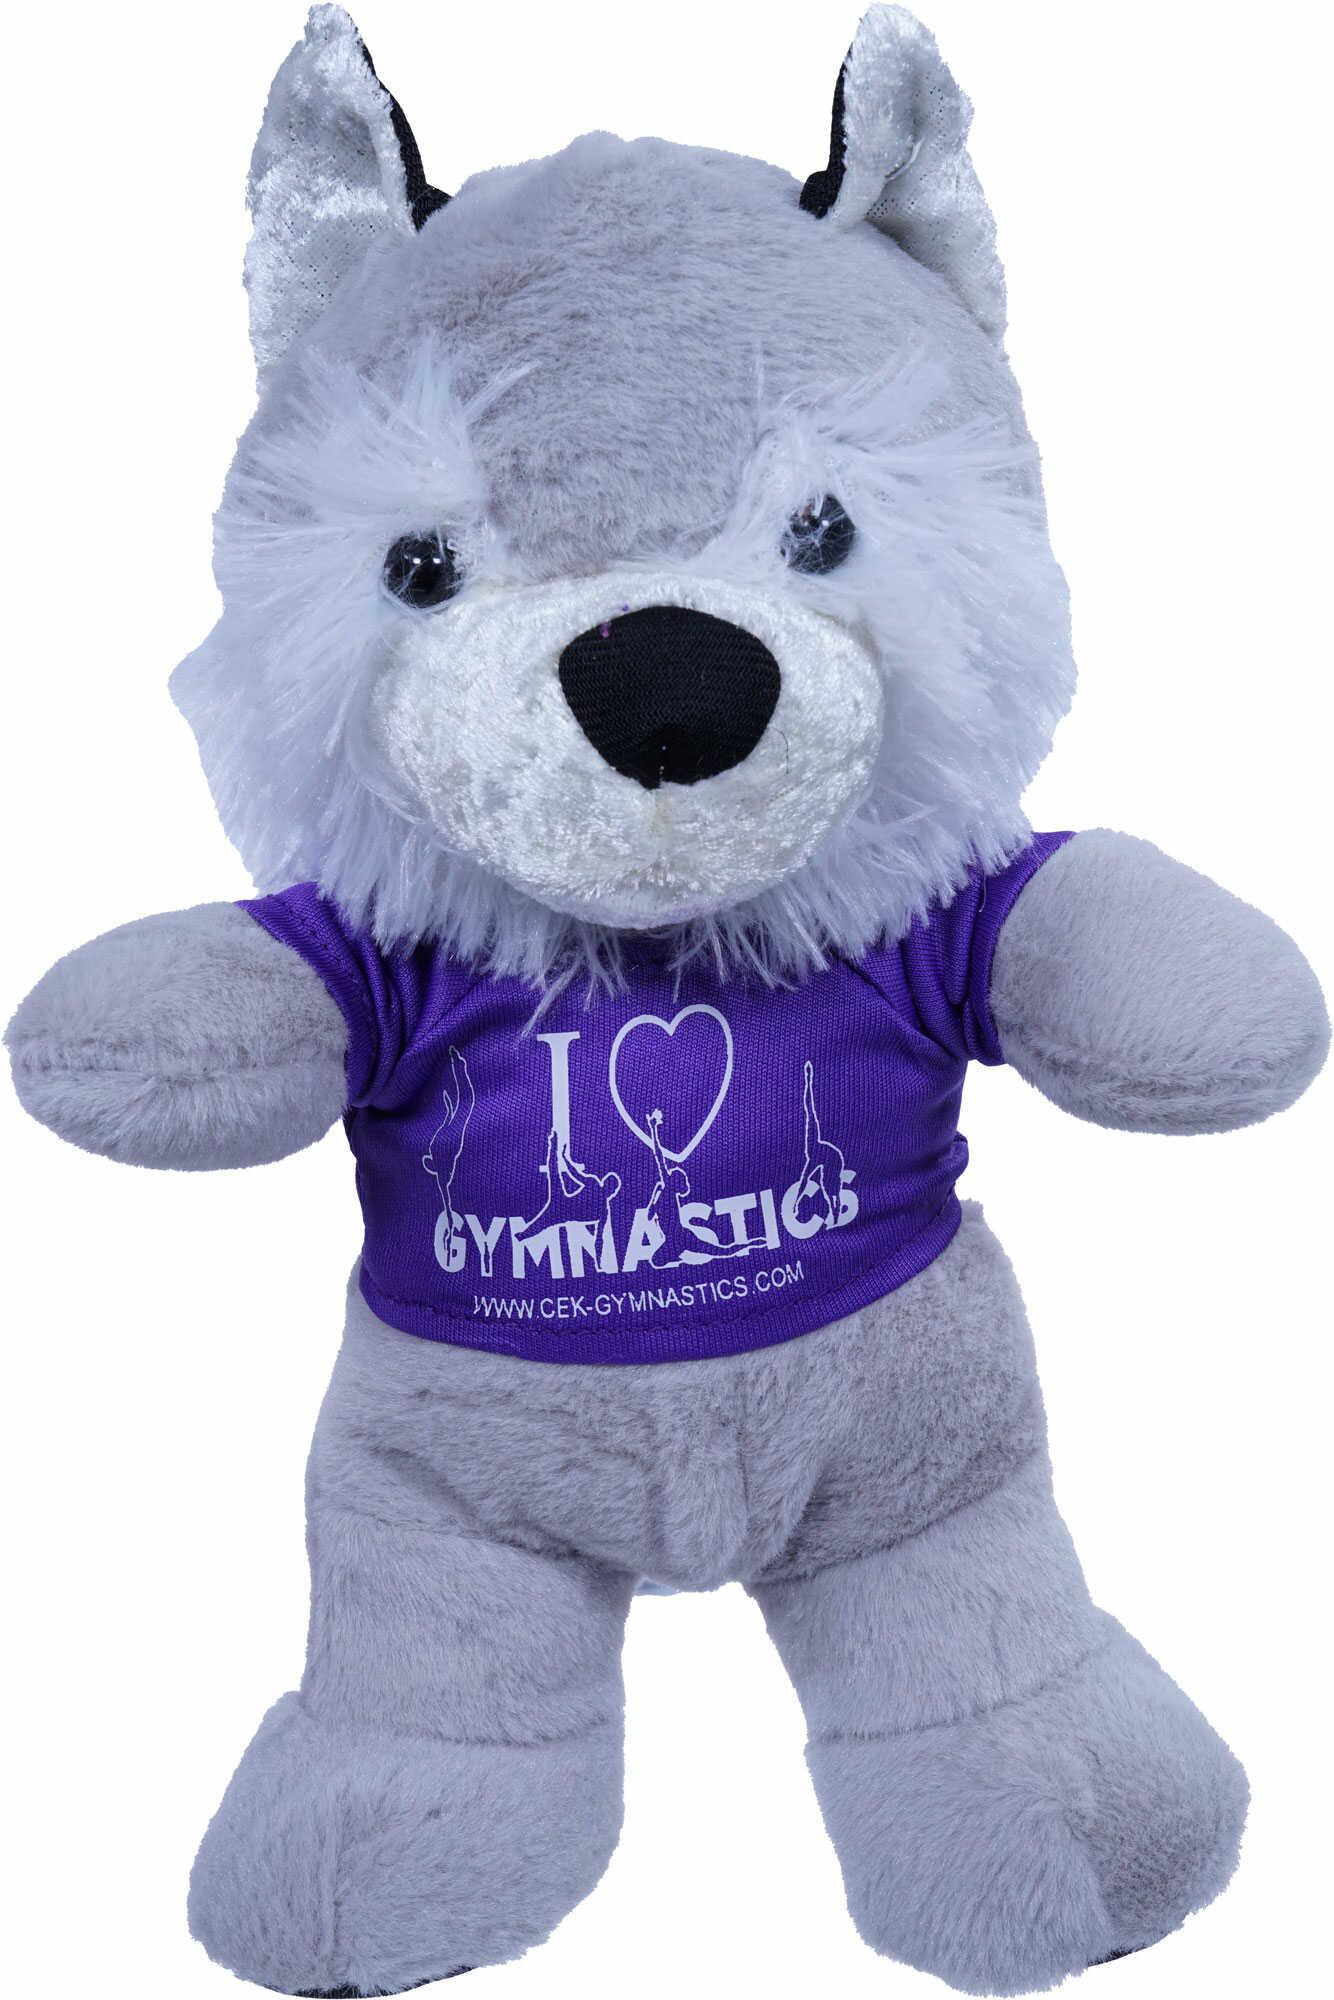 Wolf cuddly toy with promo t-shirt